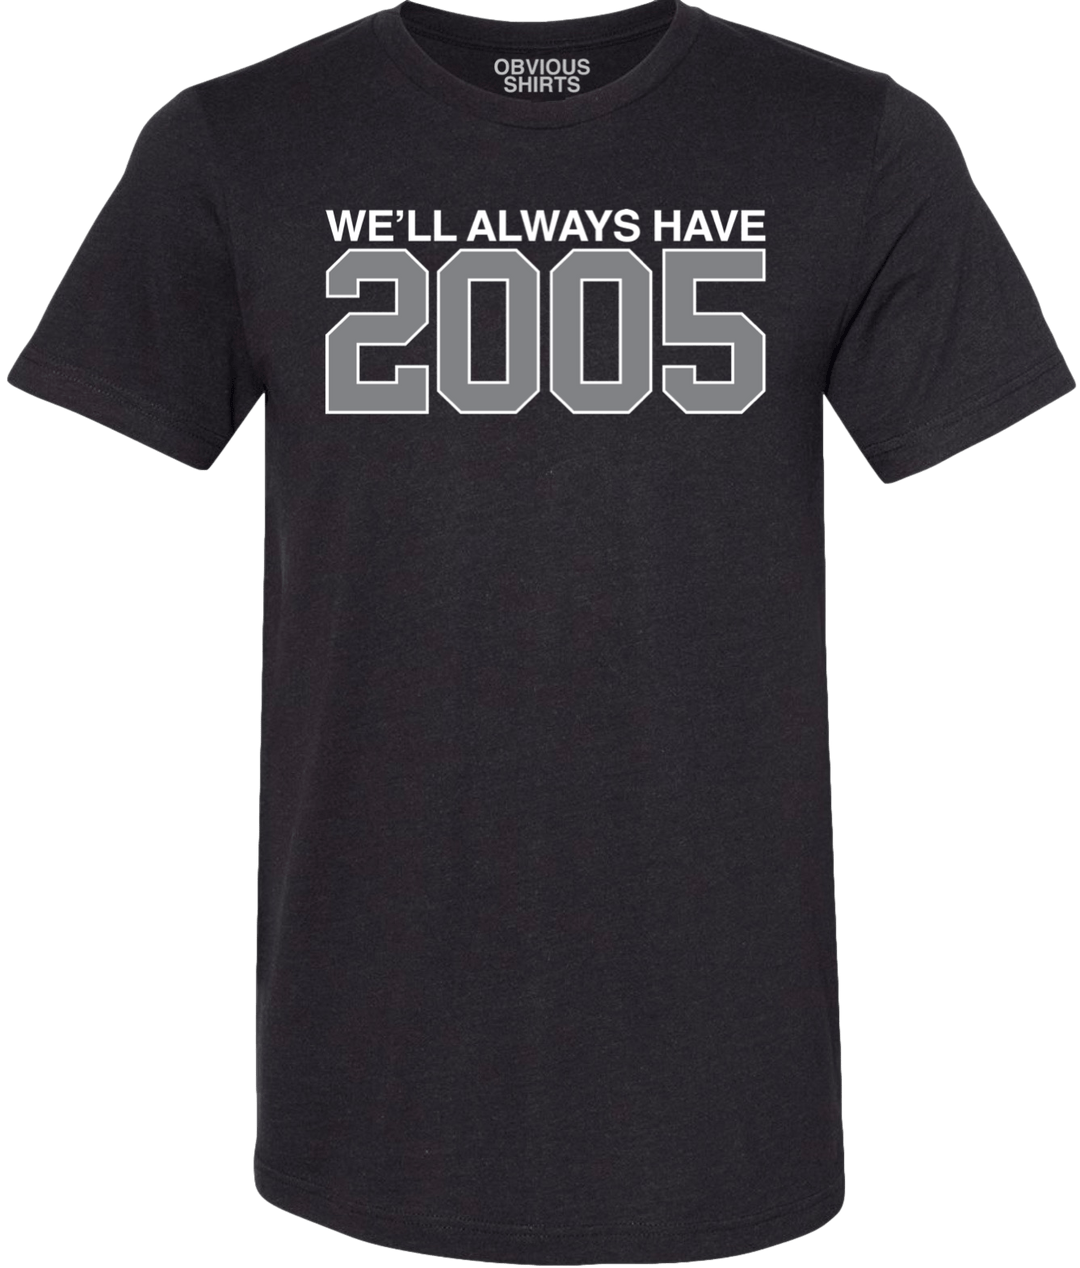 WE'LL ALWAYS HAVE 2005. - OBVIOUS SHIRTS